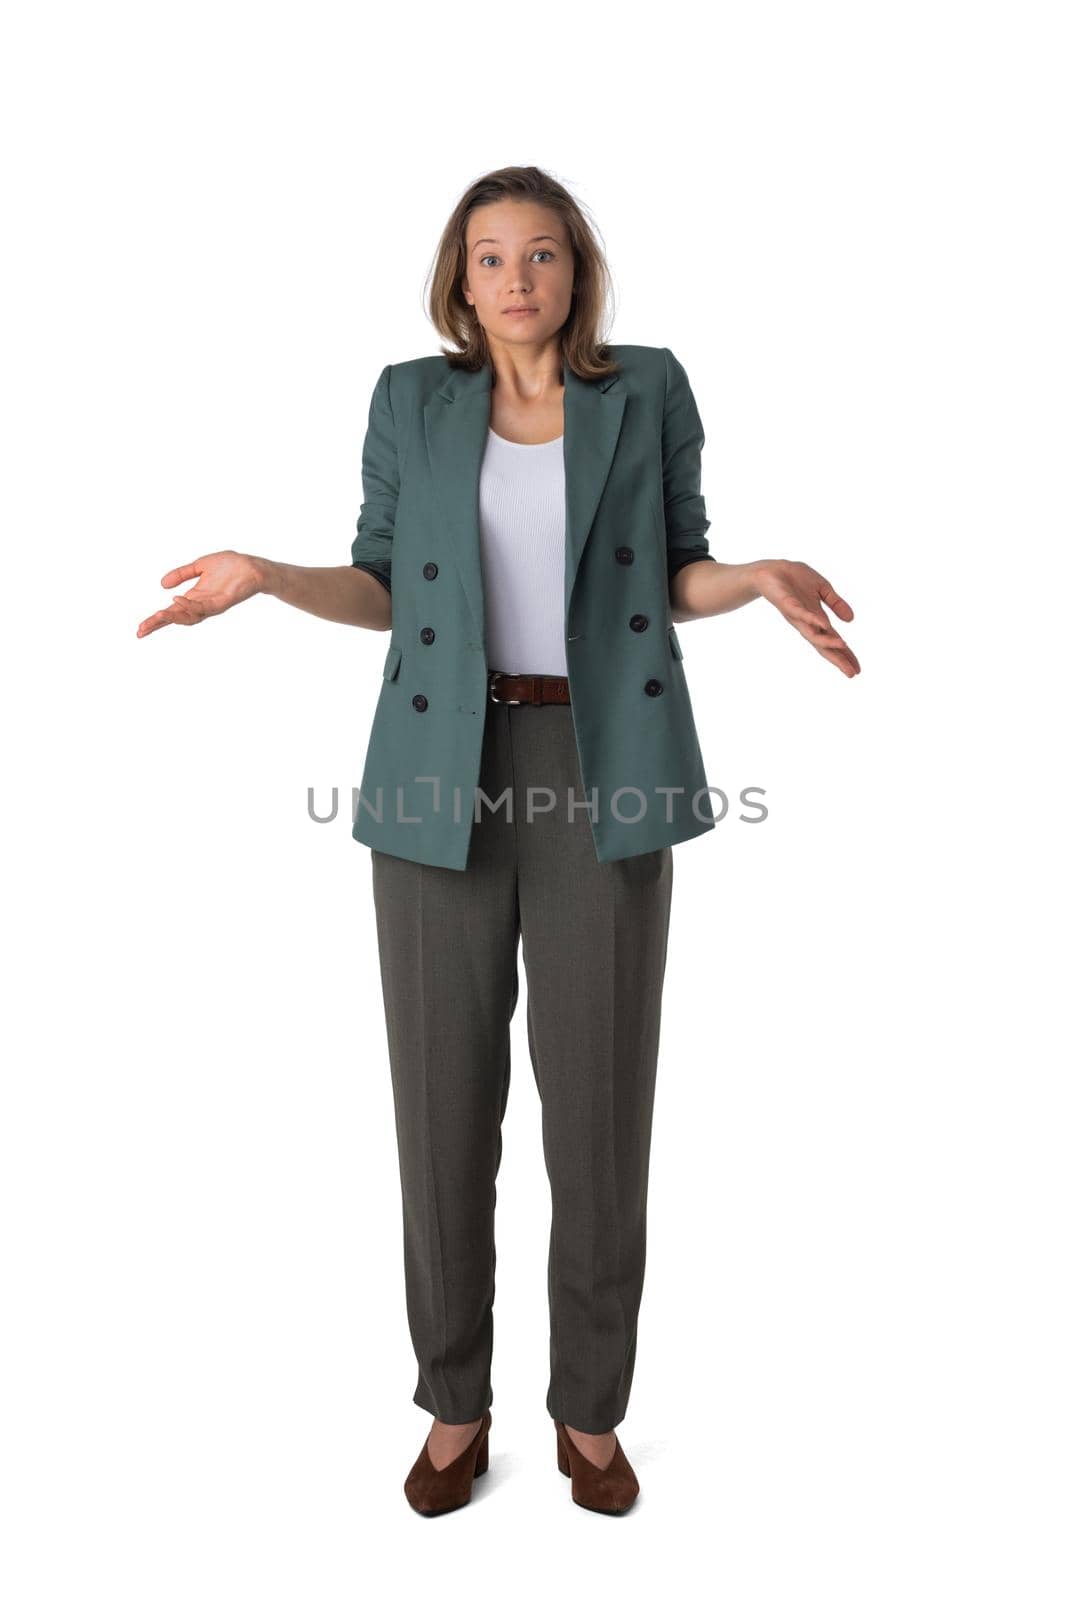 Clueless business woman isolated by ALotOfPeople